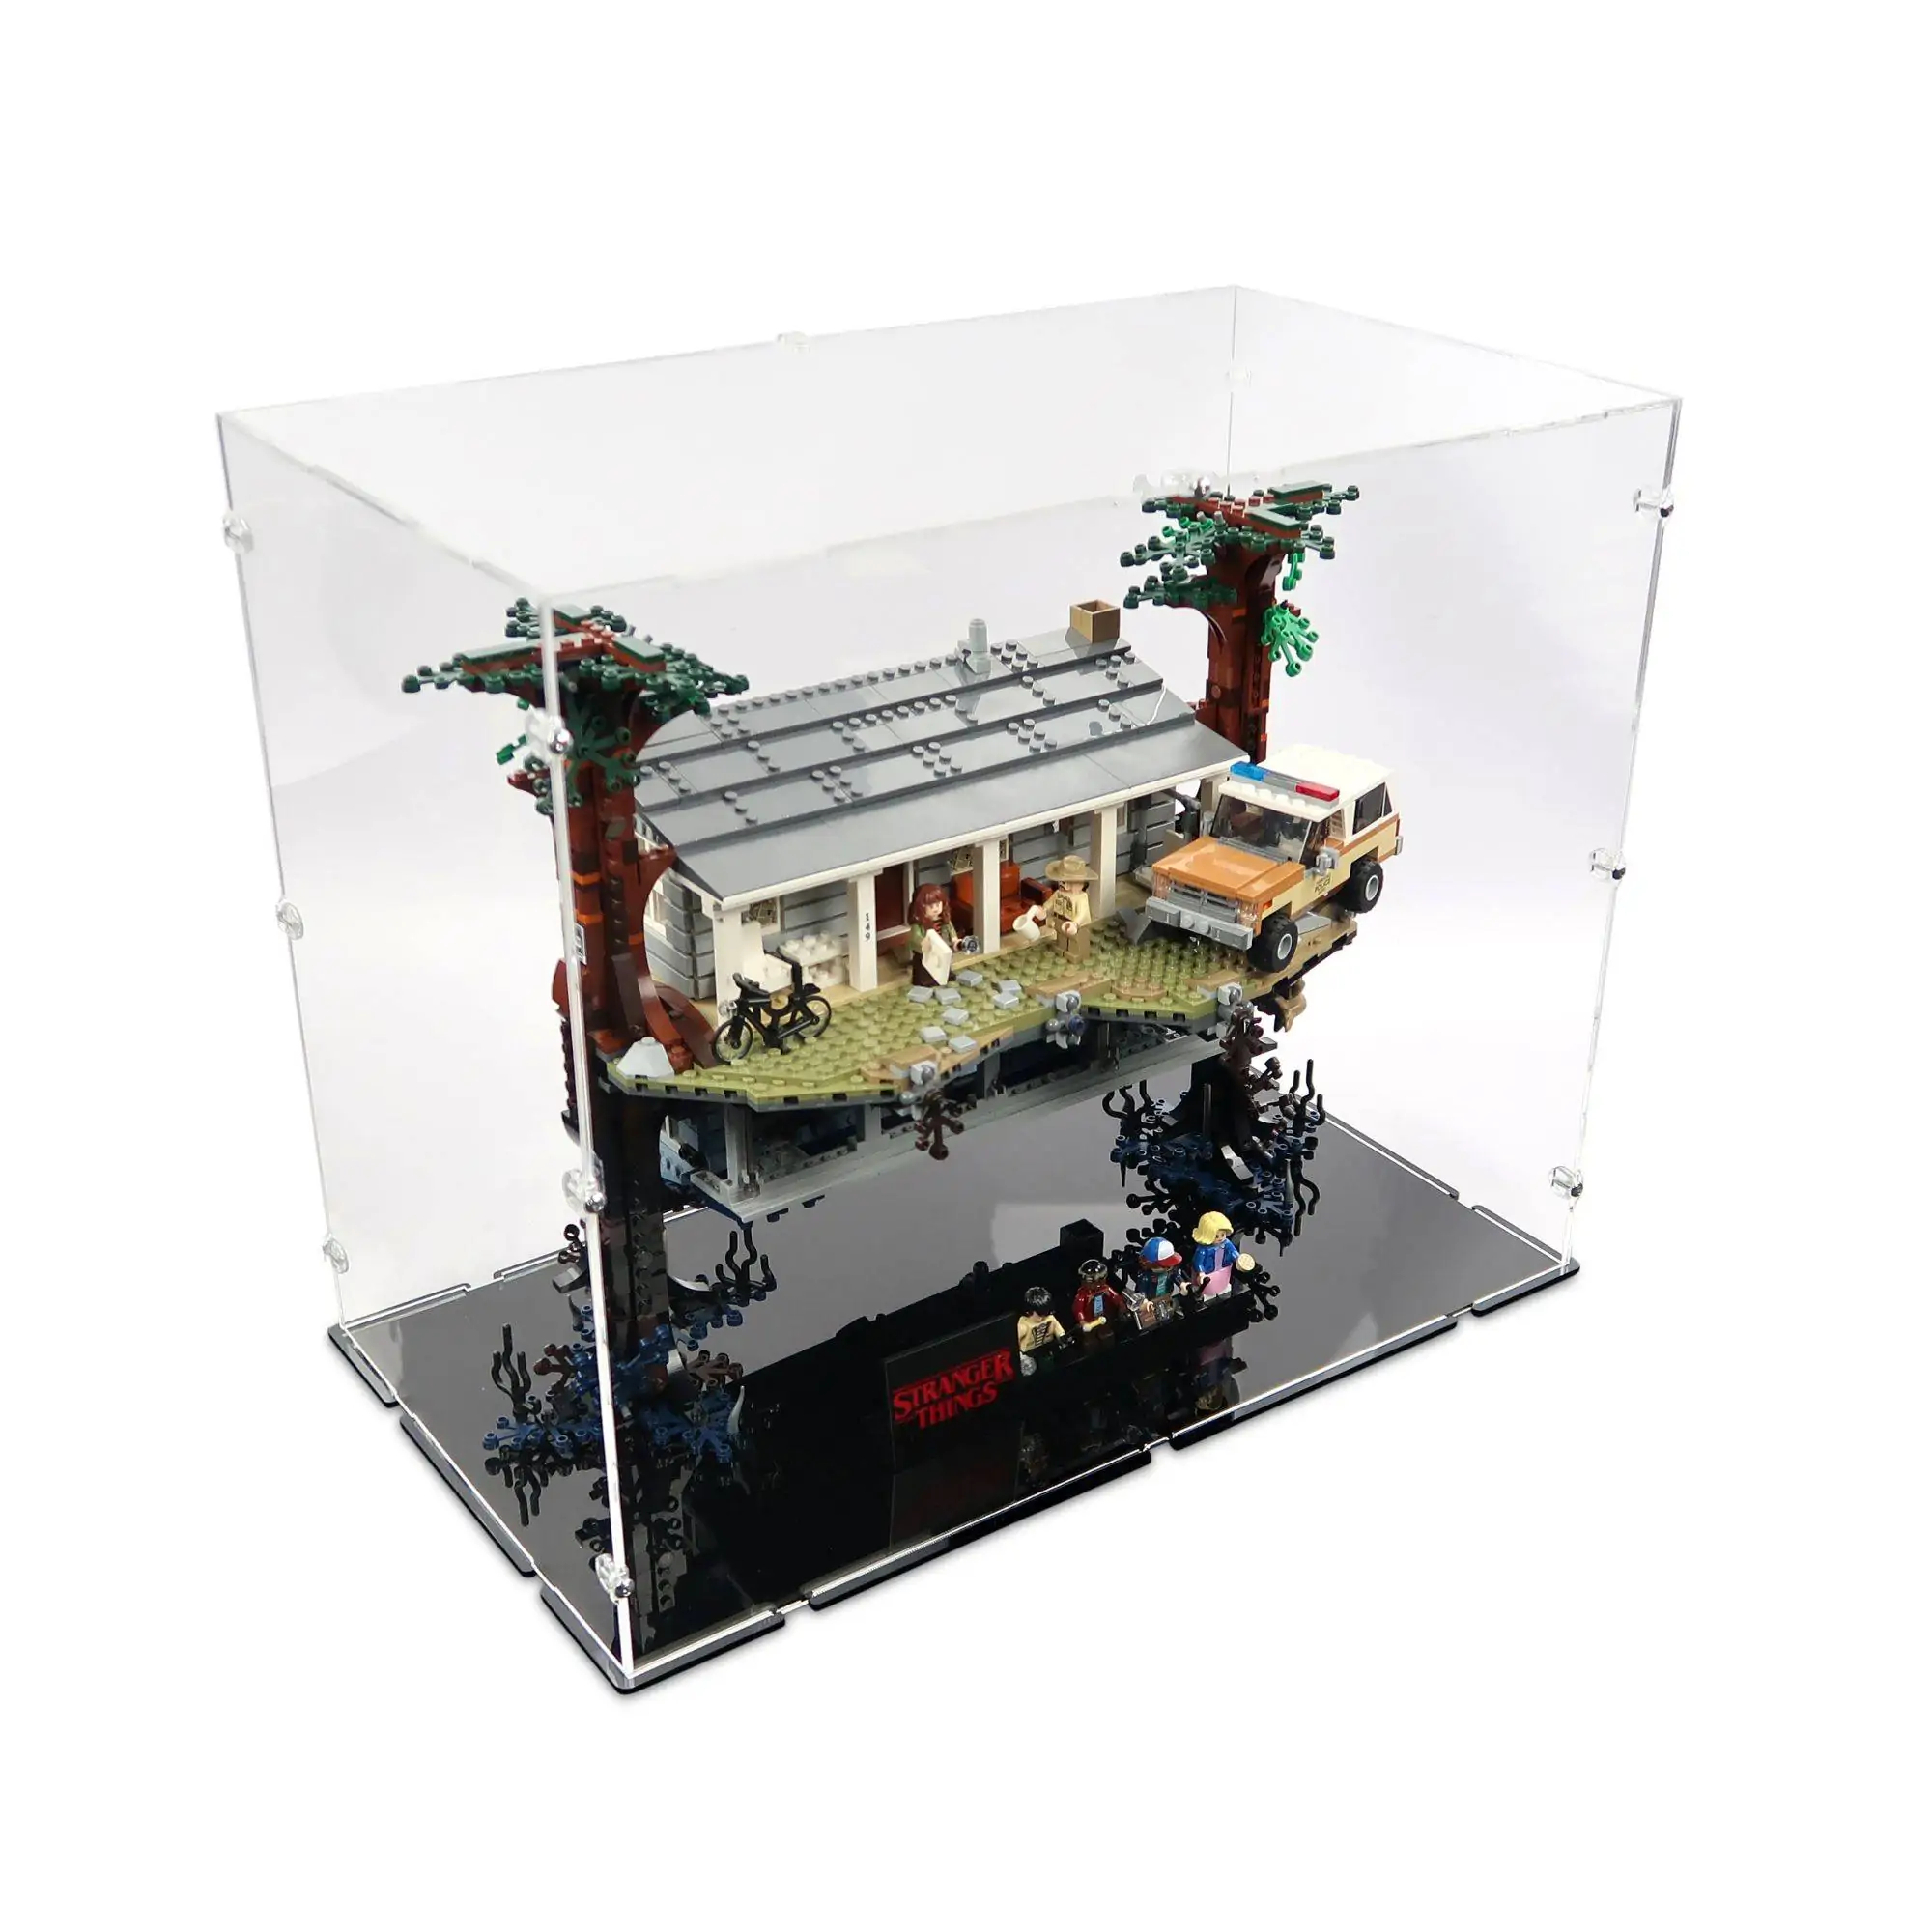 Acrylic Display Case for LEGO Upside Down (Stranger Things)